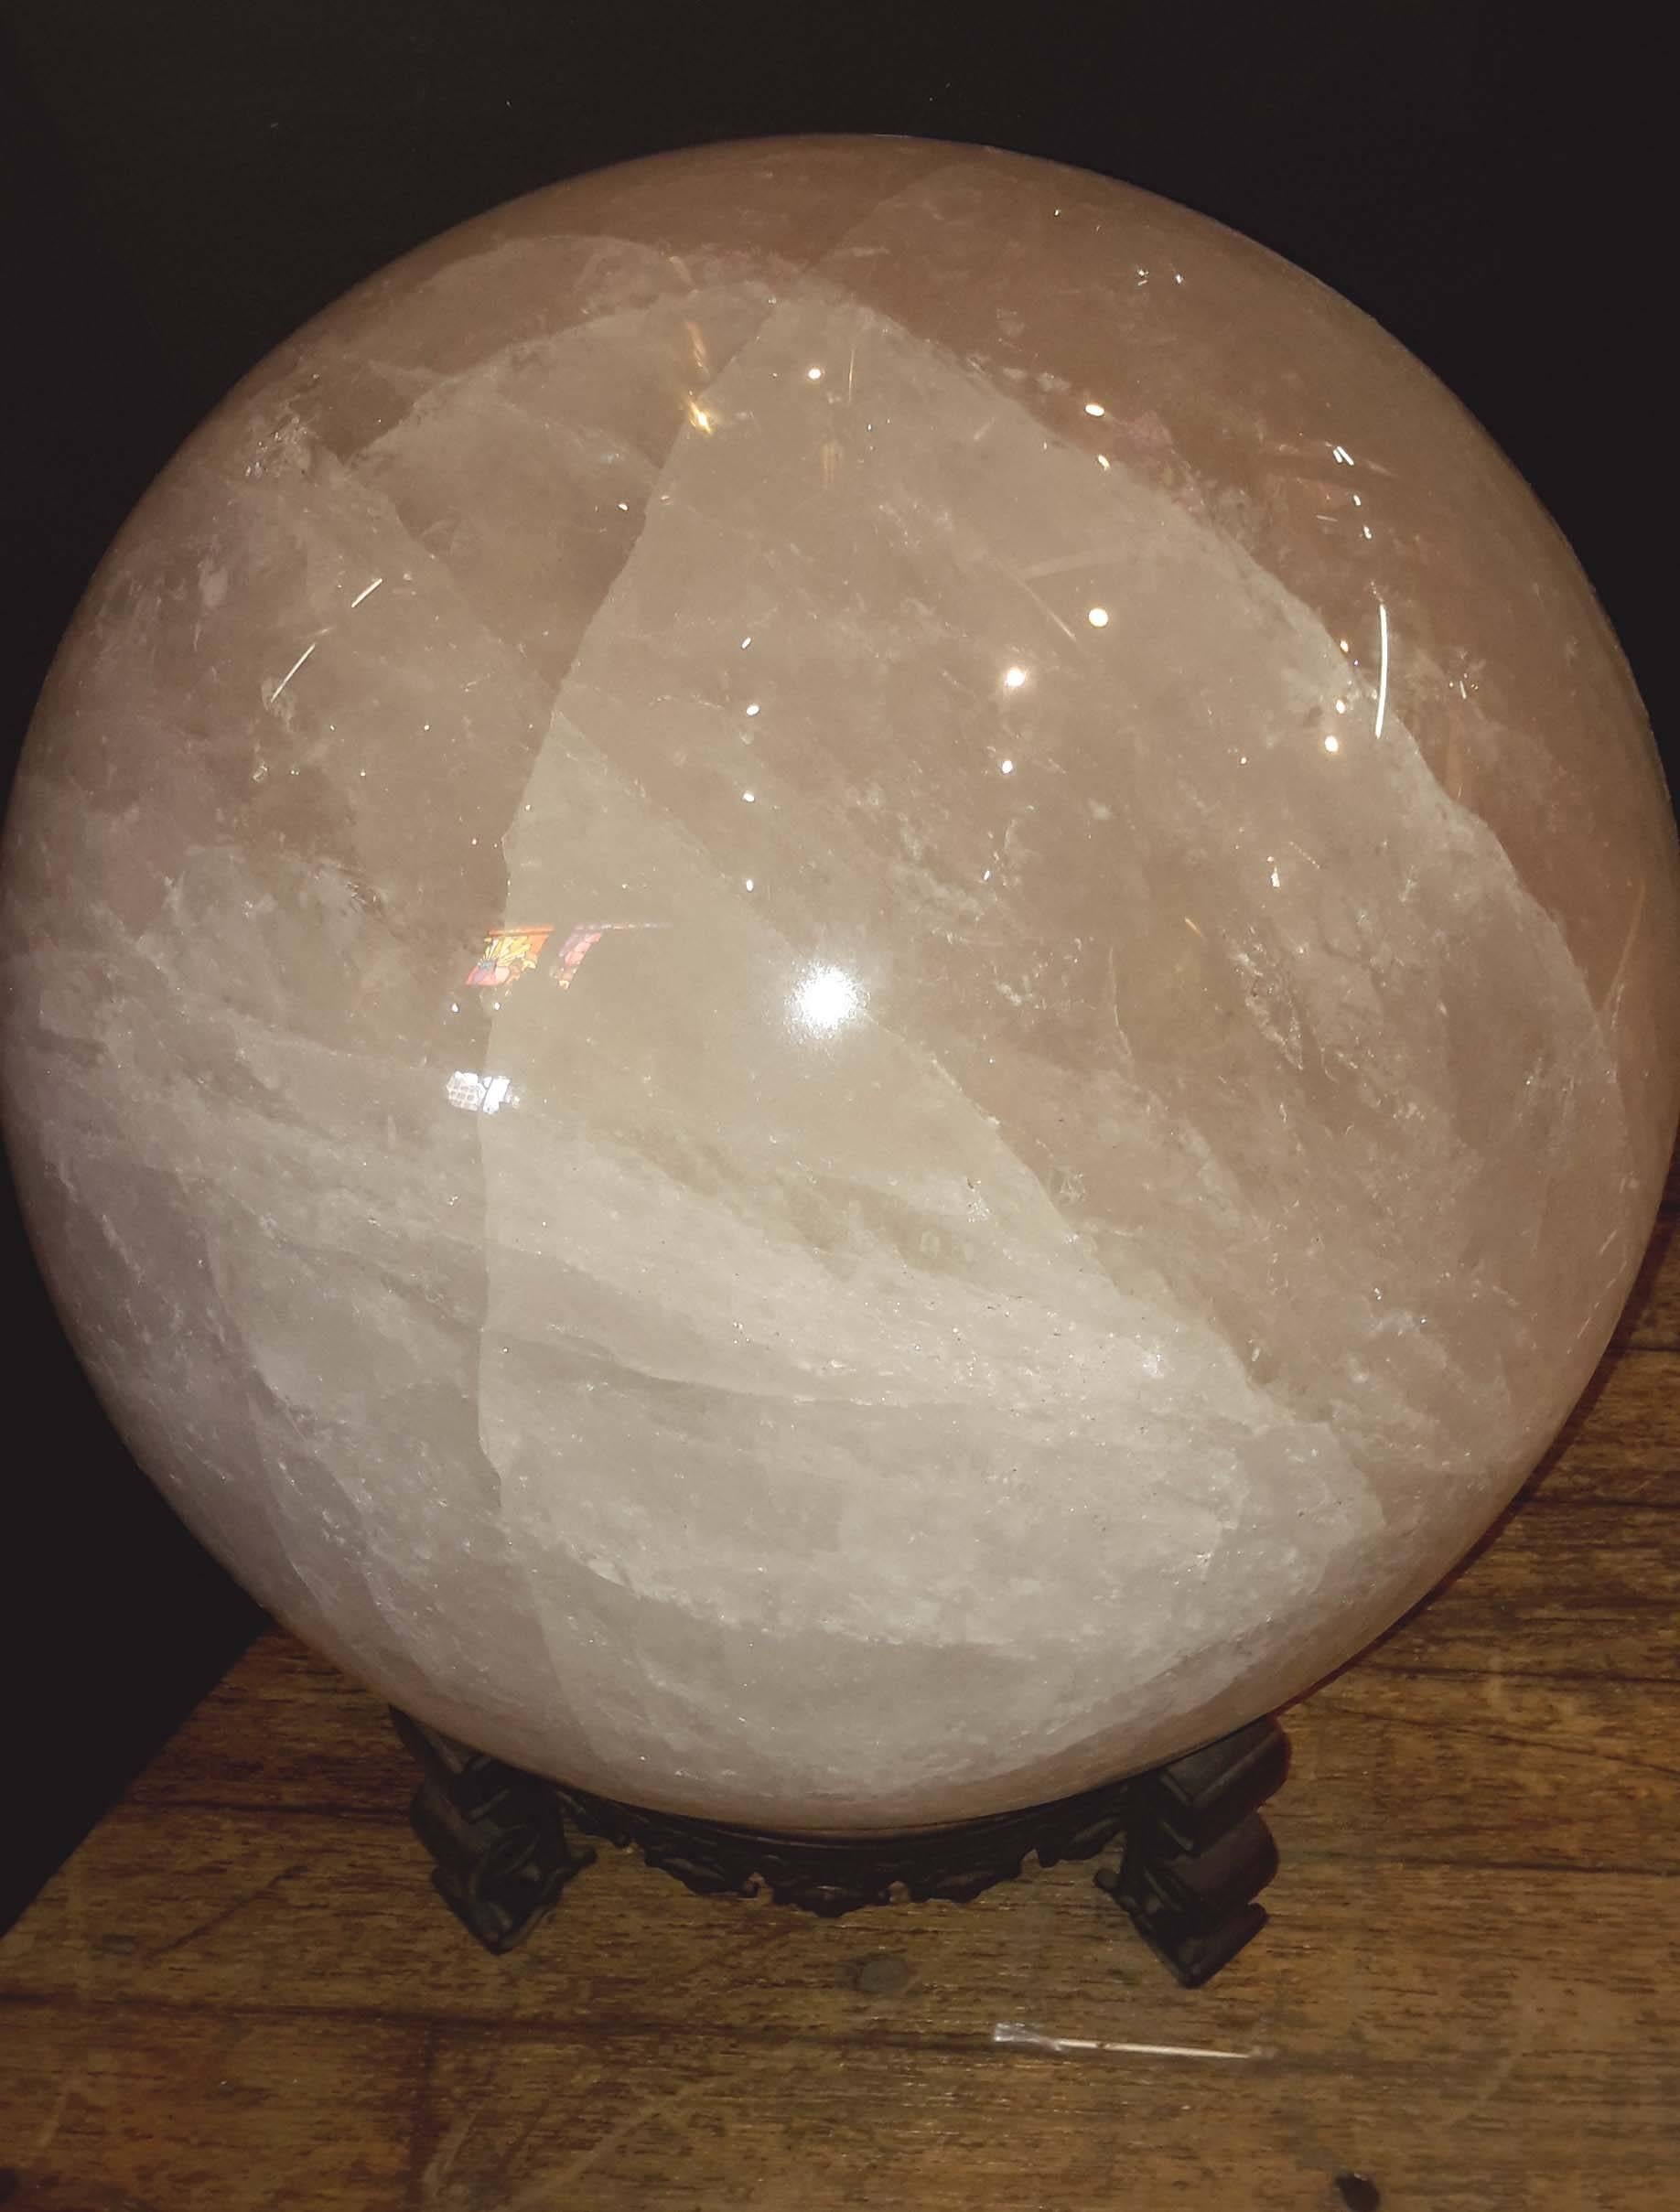 17 inches high on base, 13 inches diameter.
A beautiful specimen of natural quartz crystal with many great inclusions.
On a patinated Bronze chinoiserie French stand.
This sphere weighs over 100 LBS.